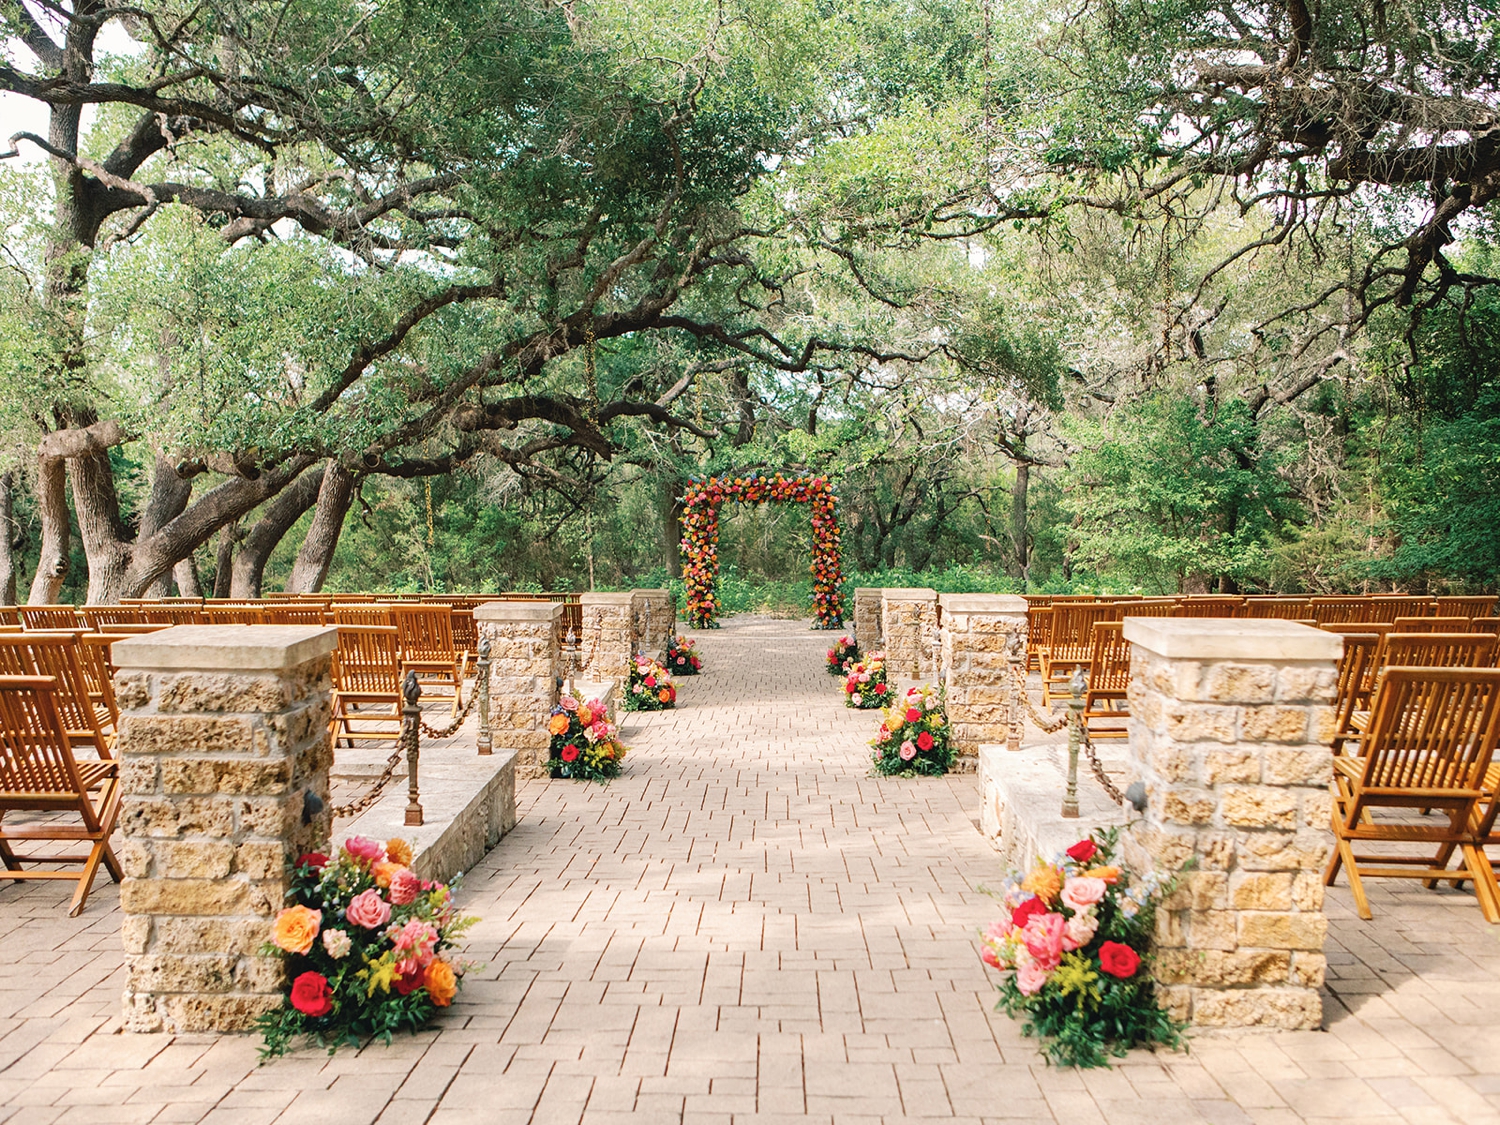 Wedding Ceremony Space with Floral Arch and Aisle Arrangements | Central Texas Floral Designer | Reiley and Rose